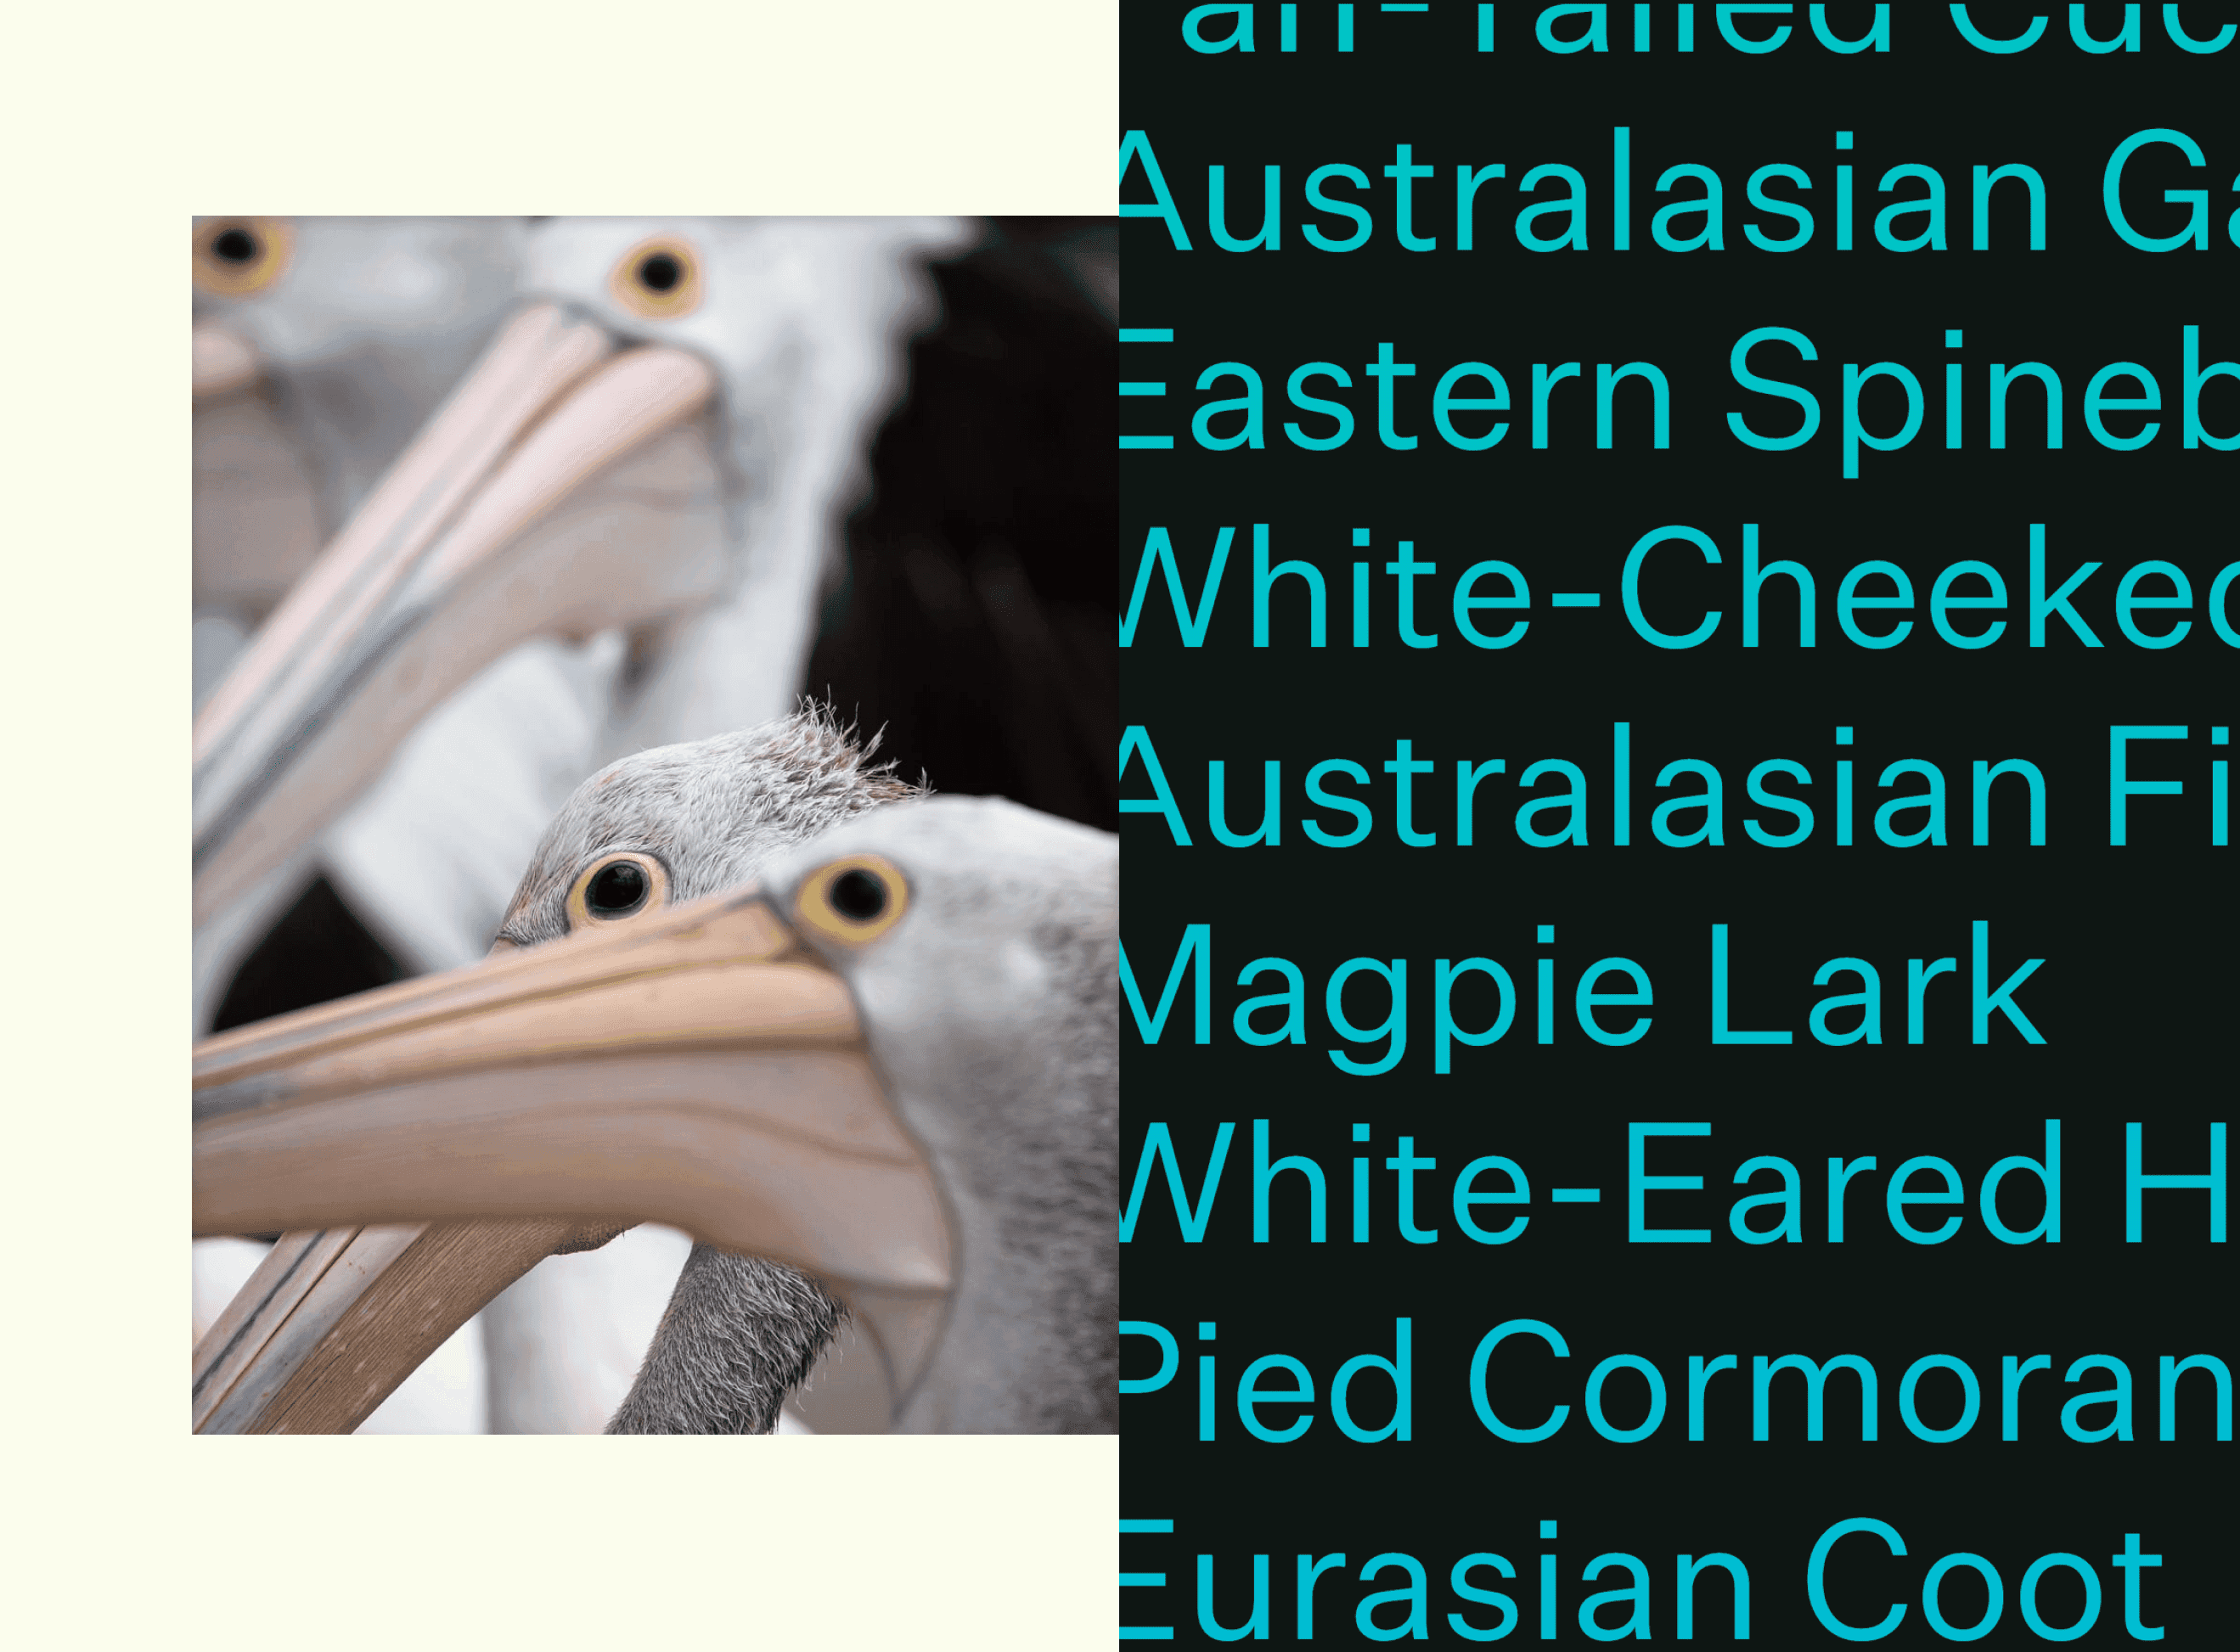 Pelicans and a list of bird names portraying the big year project.